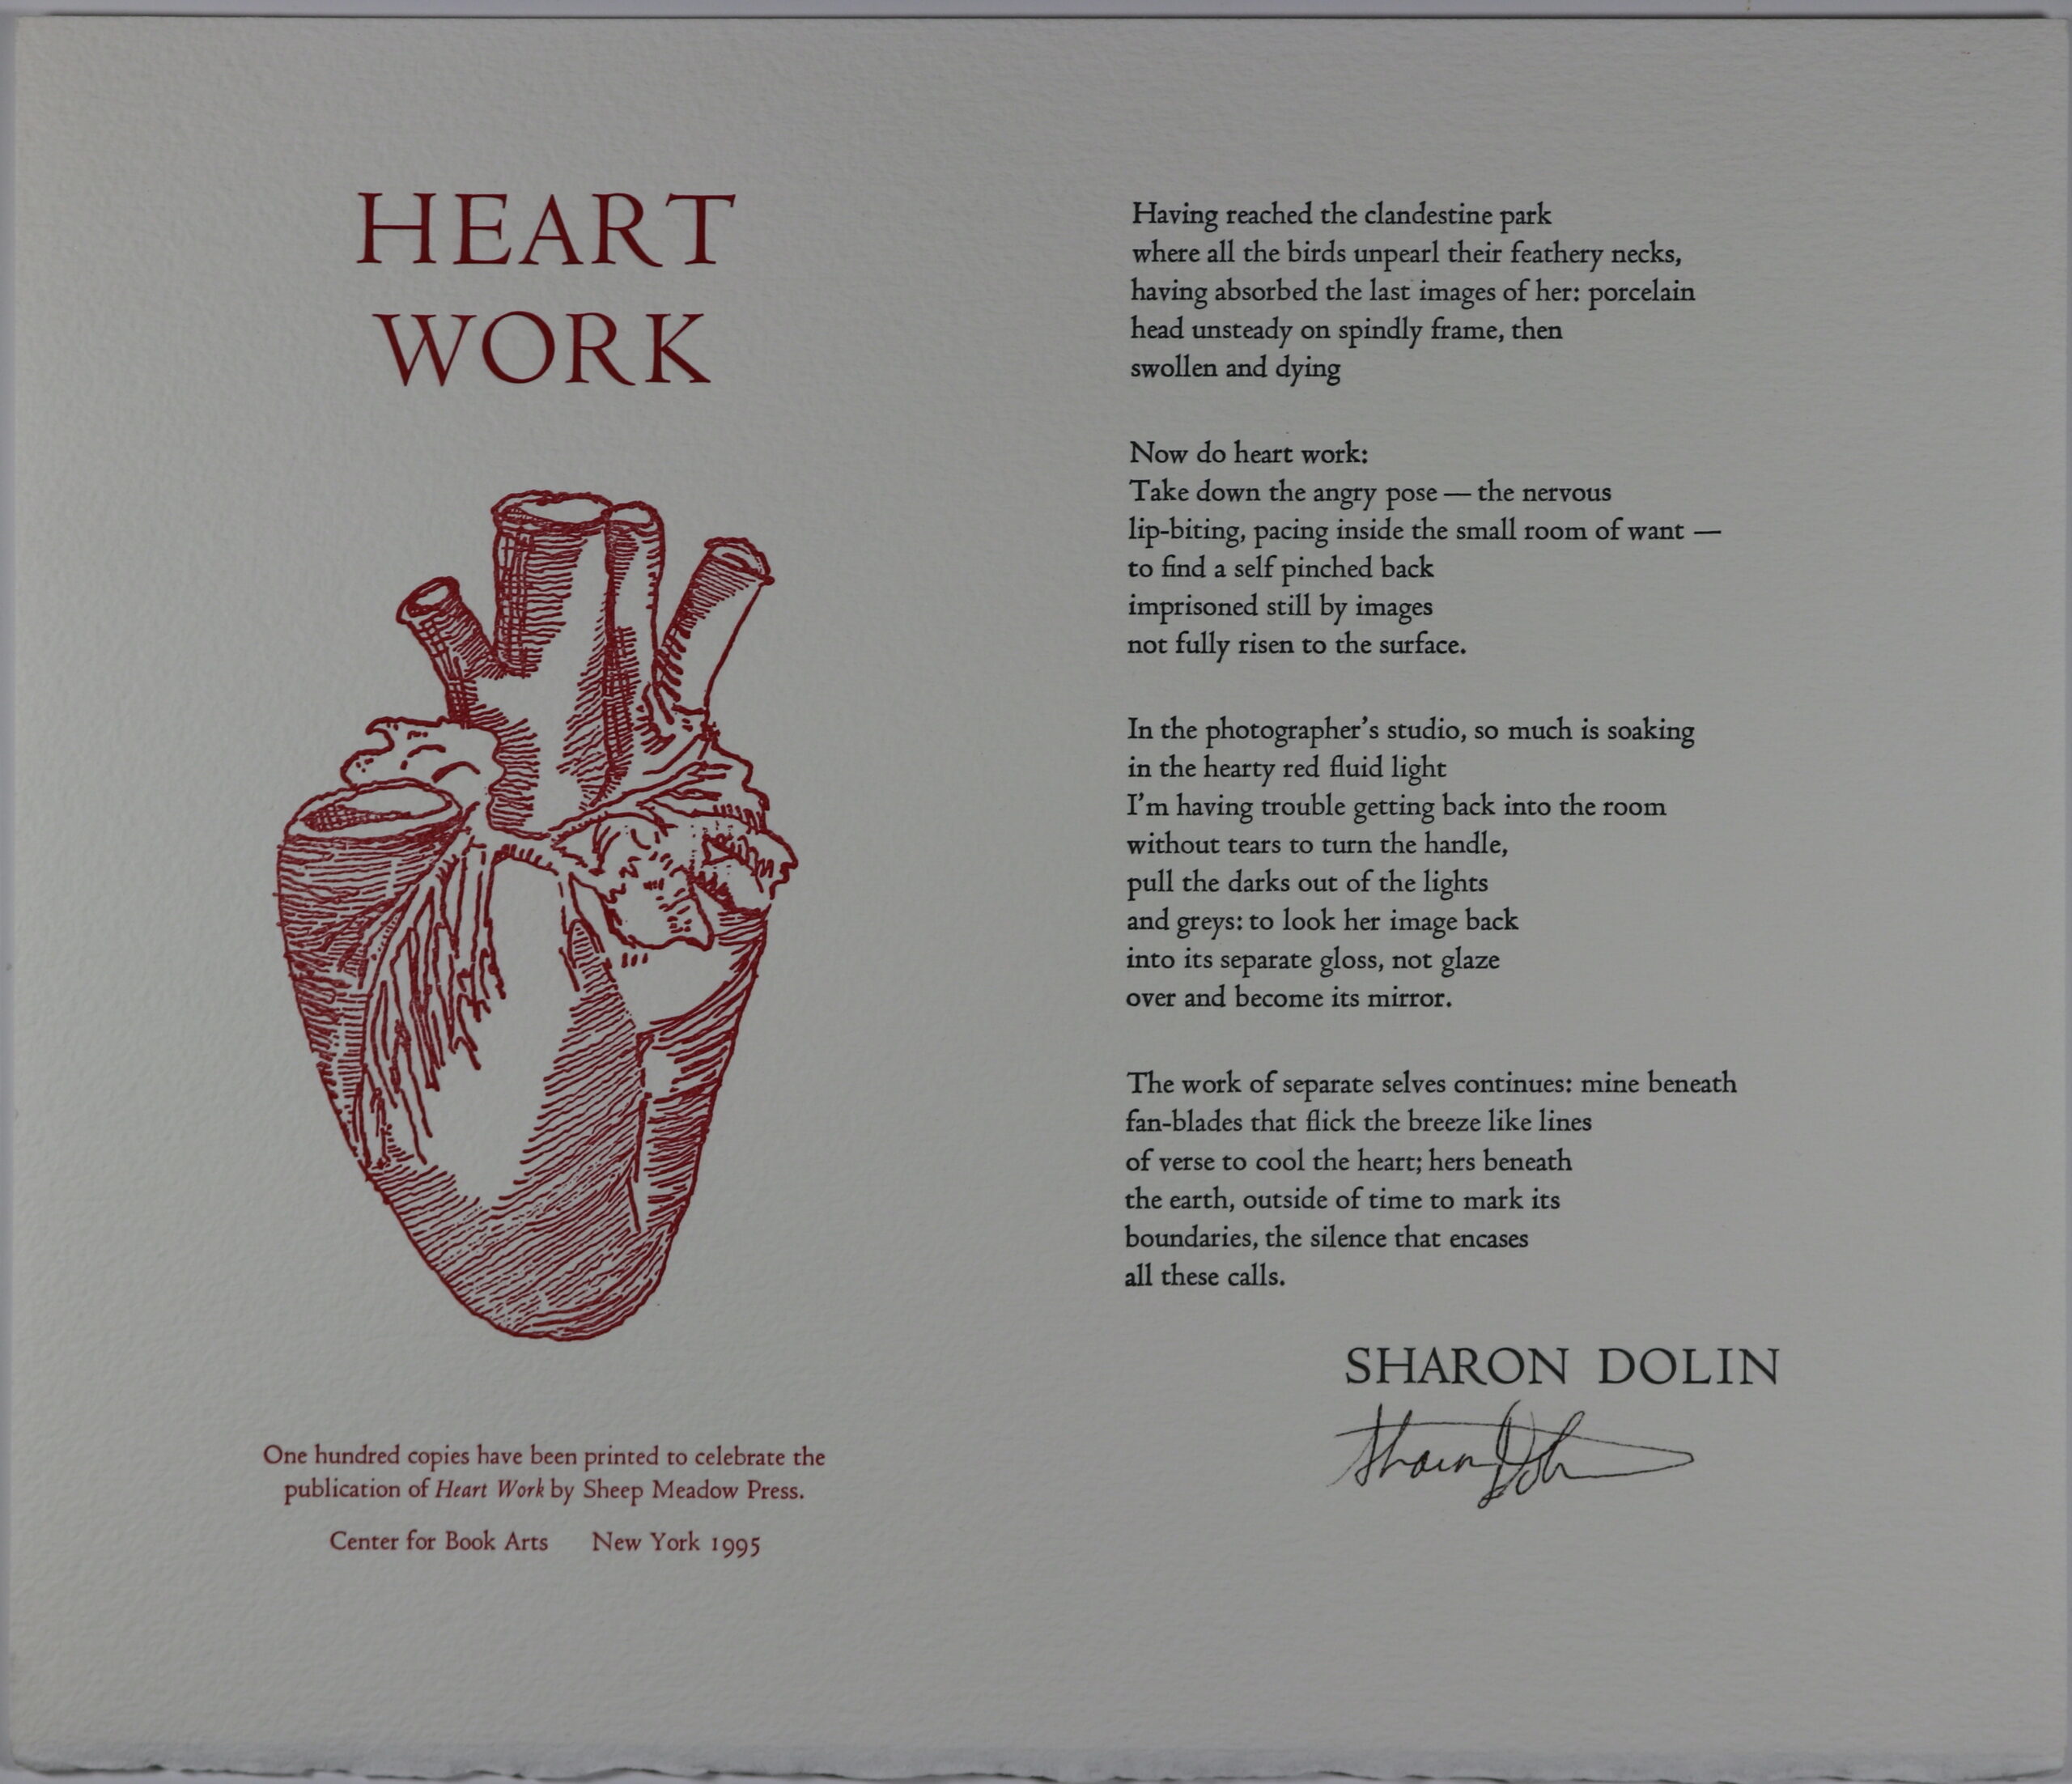 Broadside consists of a white background. Towards the left is the title centered in large, dark red letters. Below that is a realistic drawing of an anatomical heart also in dark red. To the right is the text of the poem in black lettering and formatted in four paragraphs.